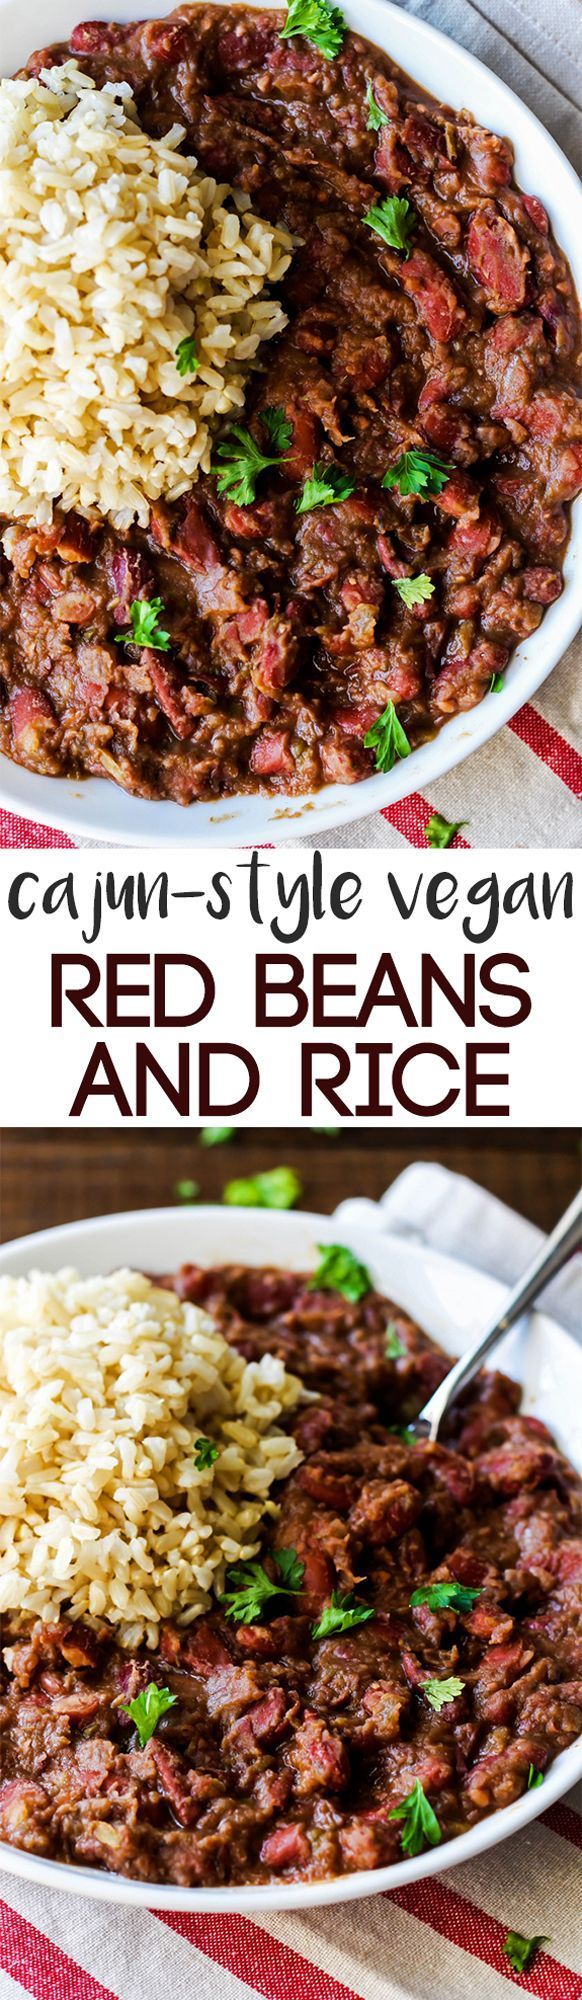 These Cajun-Style Vegan Red Beans and Rice are a healthy version of the traditional Louisiana dish, but are still just as